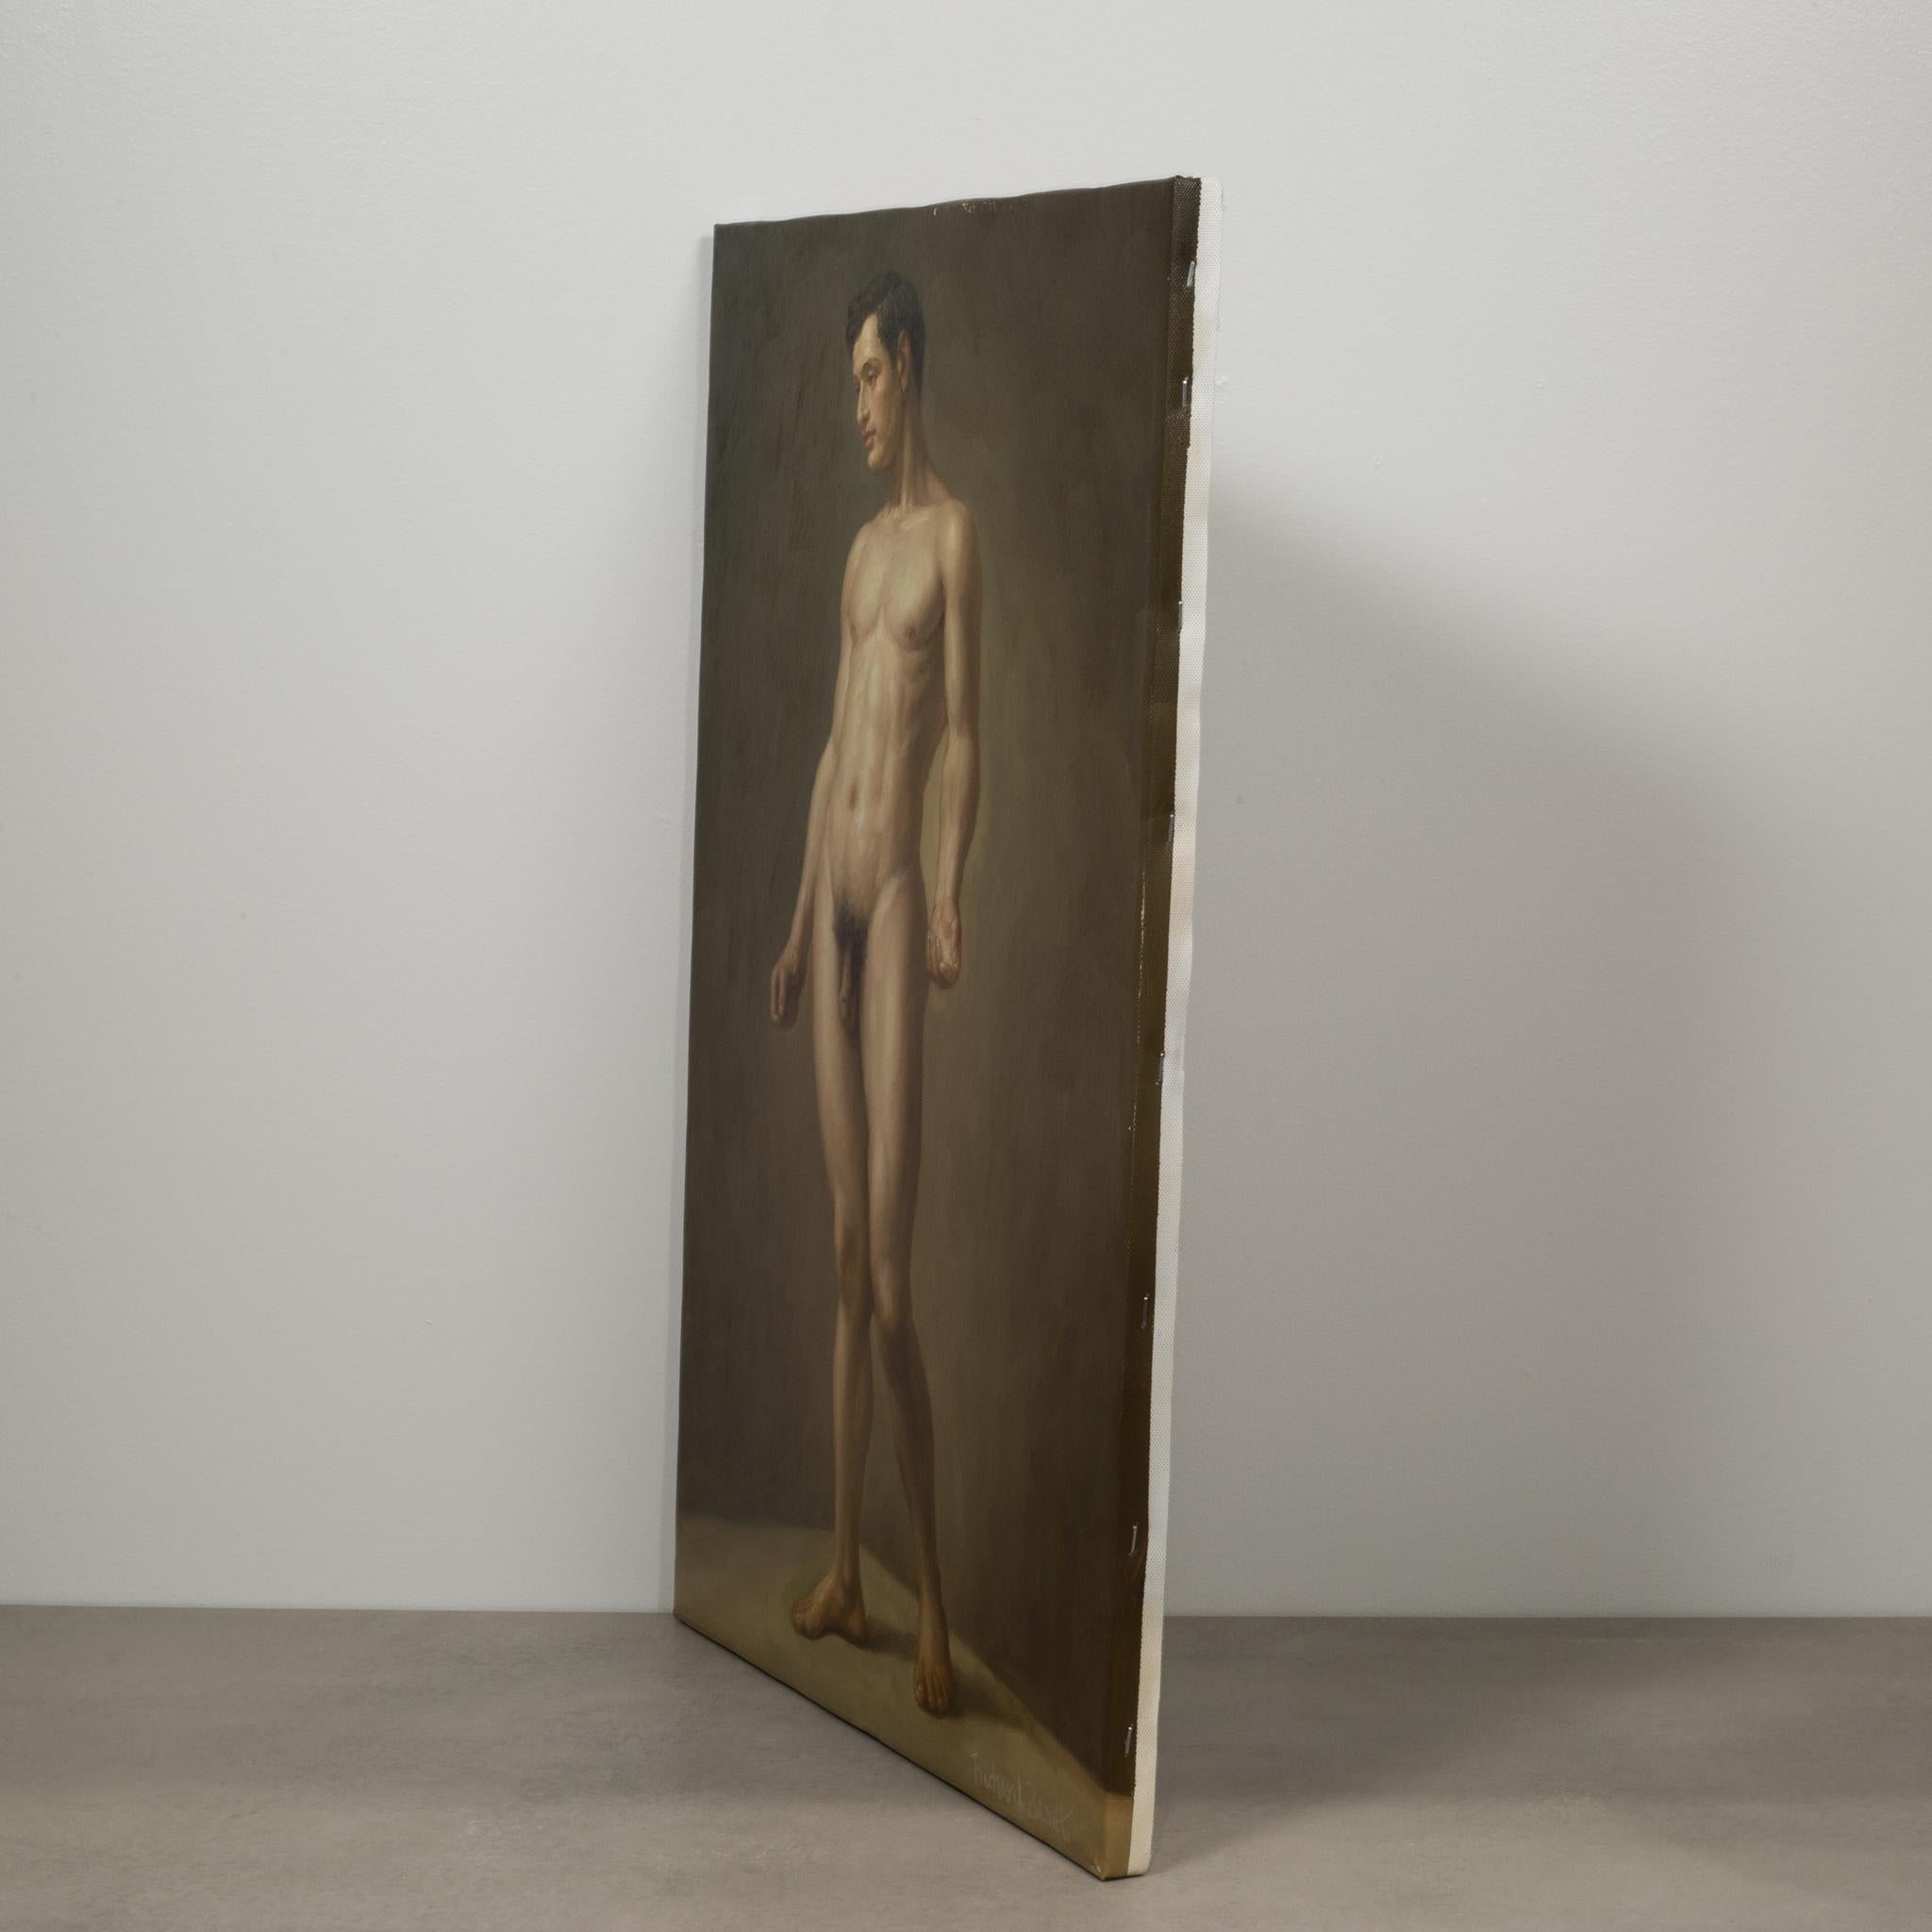 About
This is an original oil portrait on canvas of a nude male figure by Richard Biset, USA 1980. It presents a modern take on a classic figurative style. There is a careful balance of color, lighting and mood. The subject is youthful and